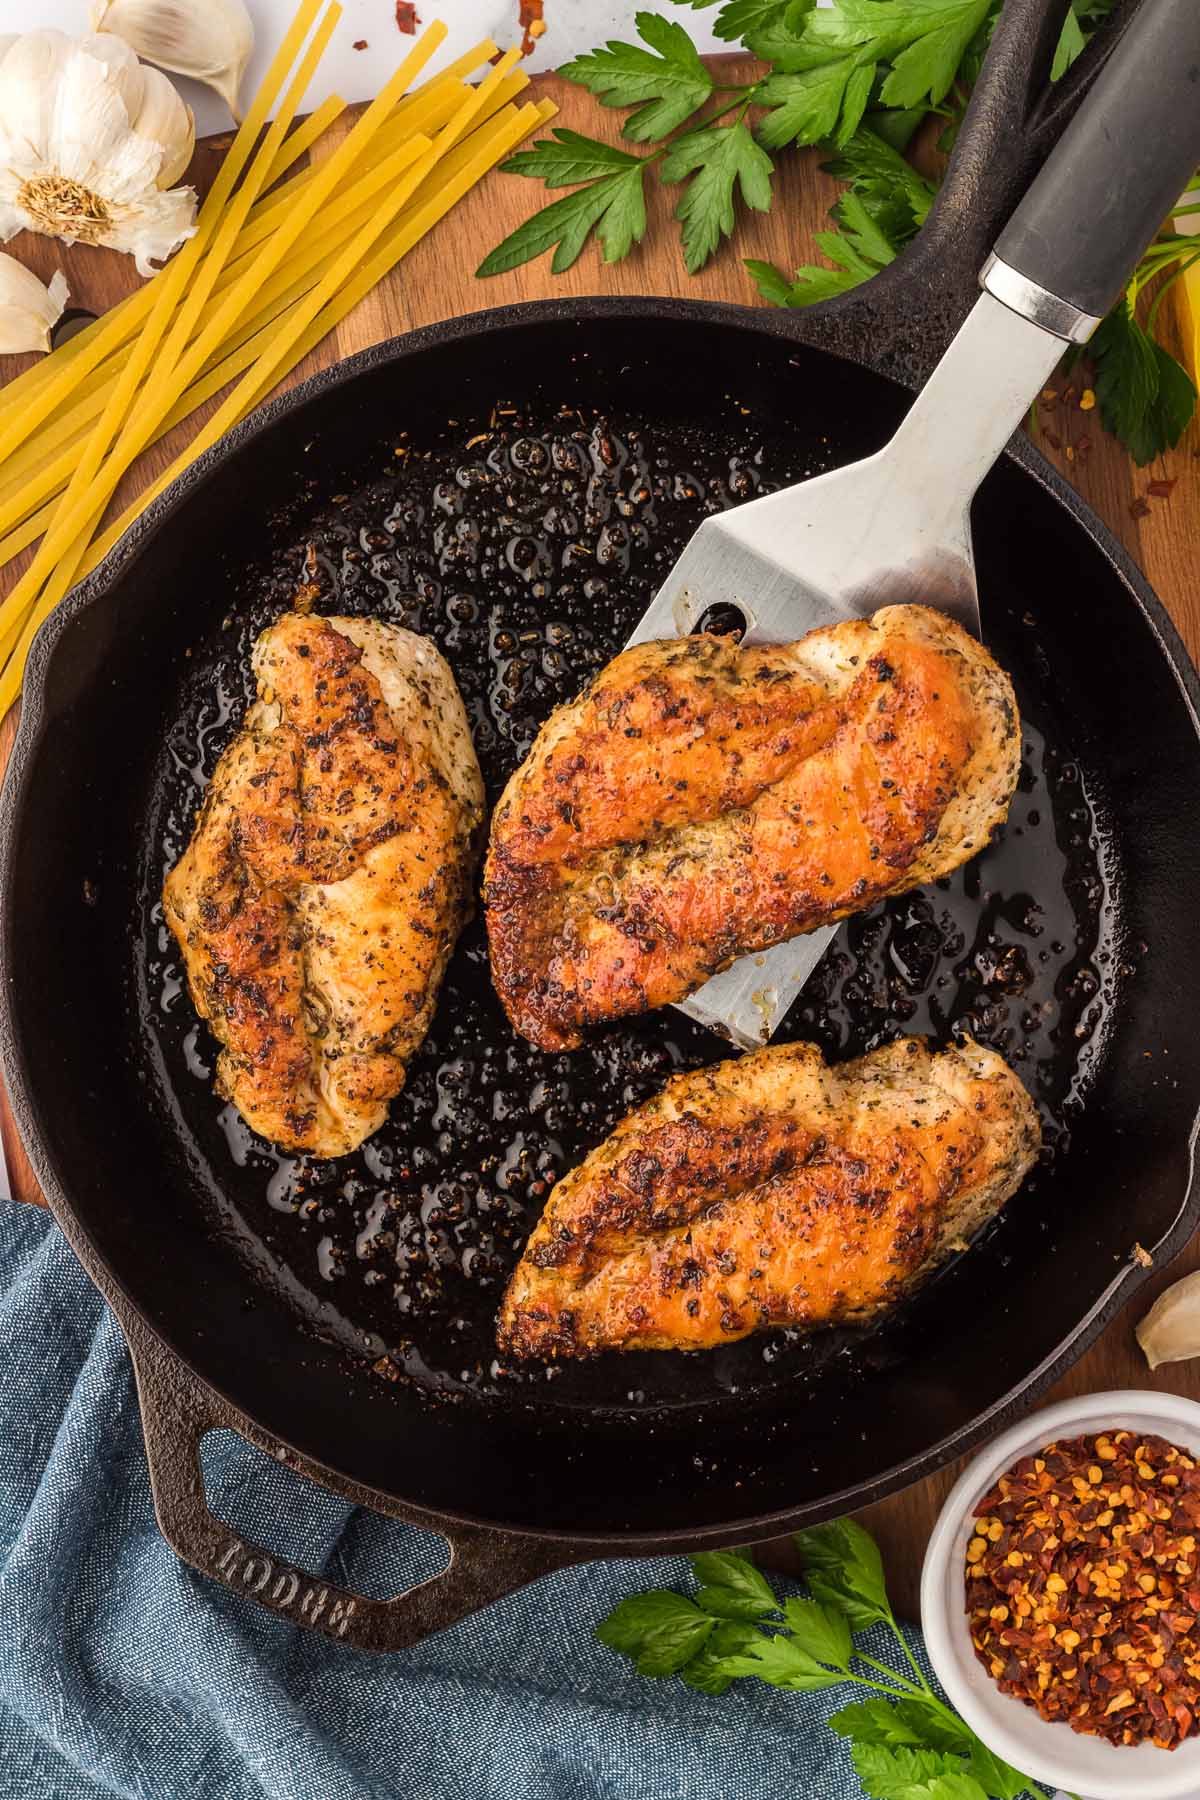 three pan seared chicken breasts in a cast iron skillet.